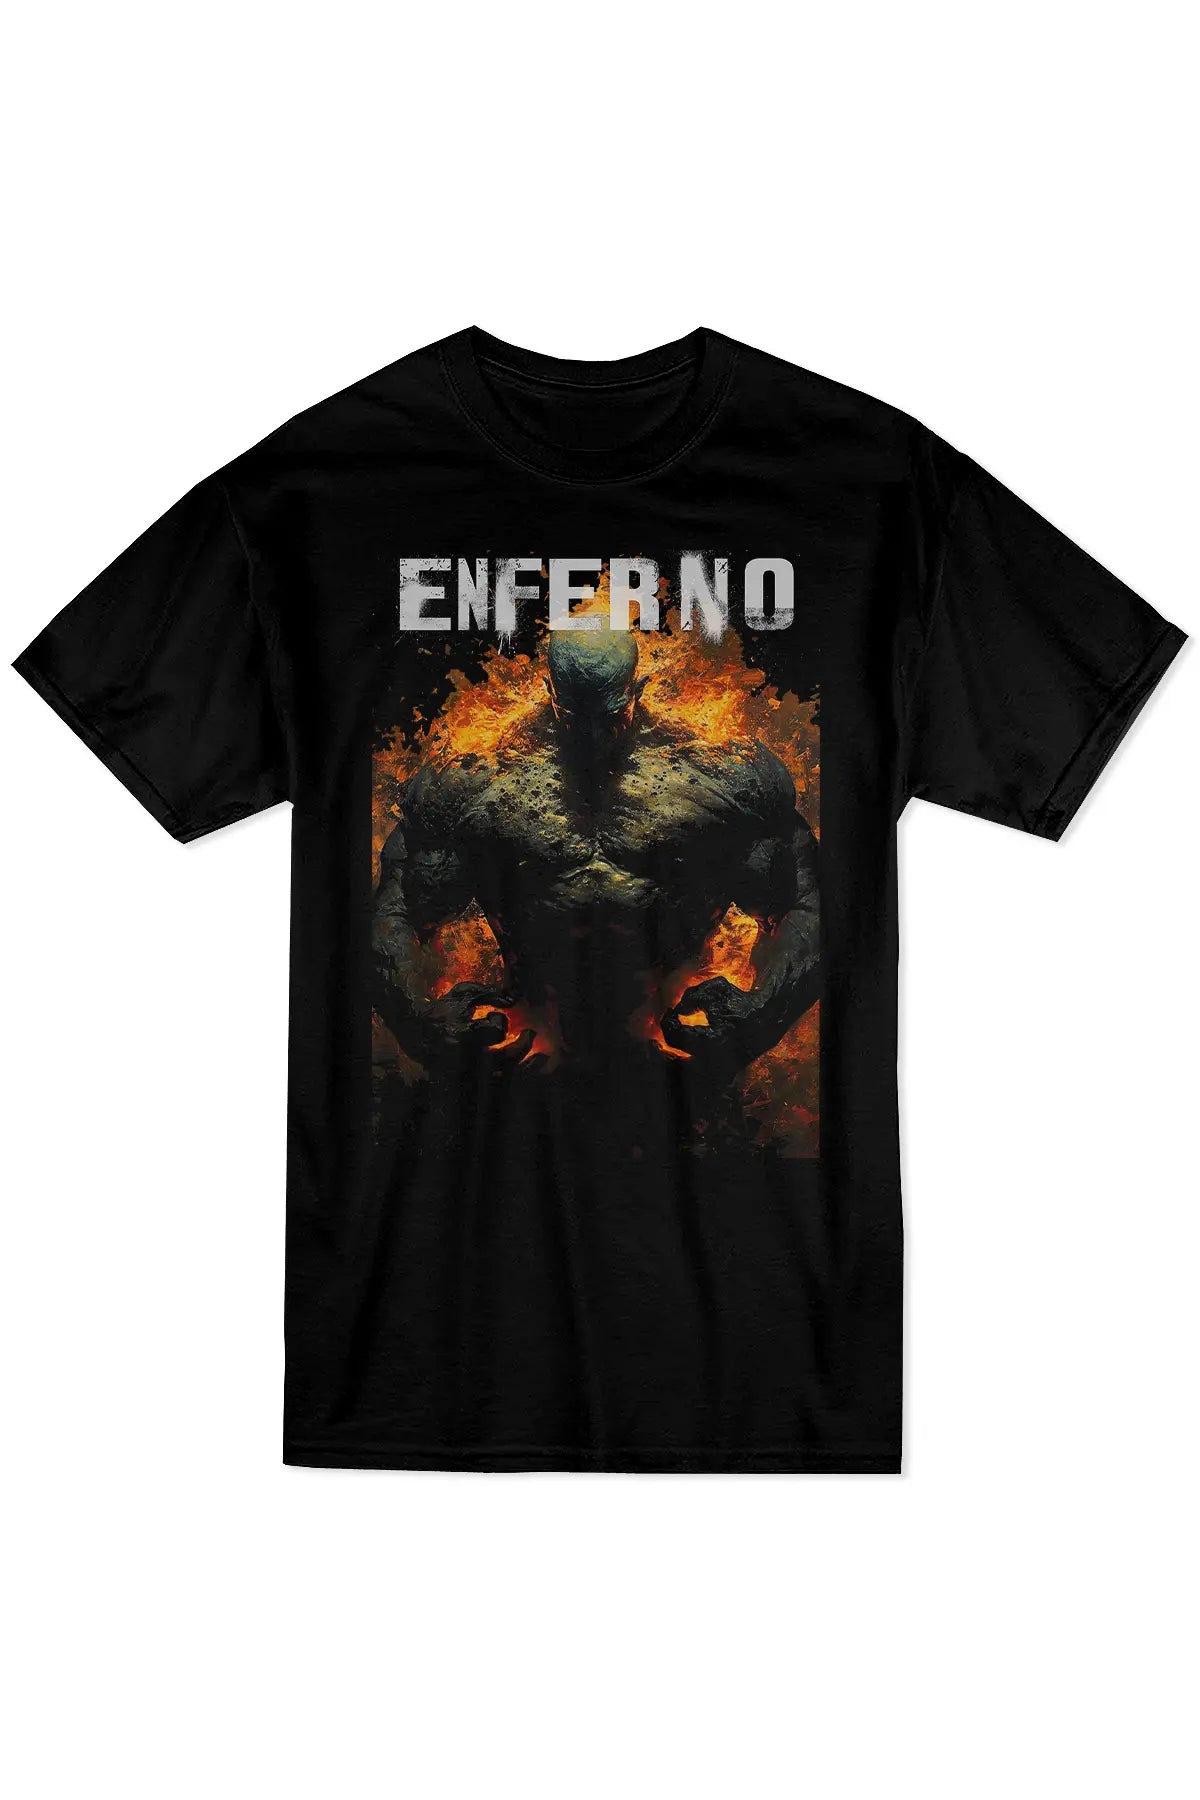 Enferno The Fire Within Tee in Black.